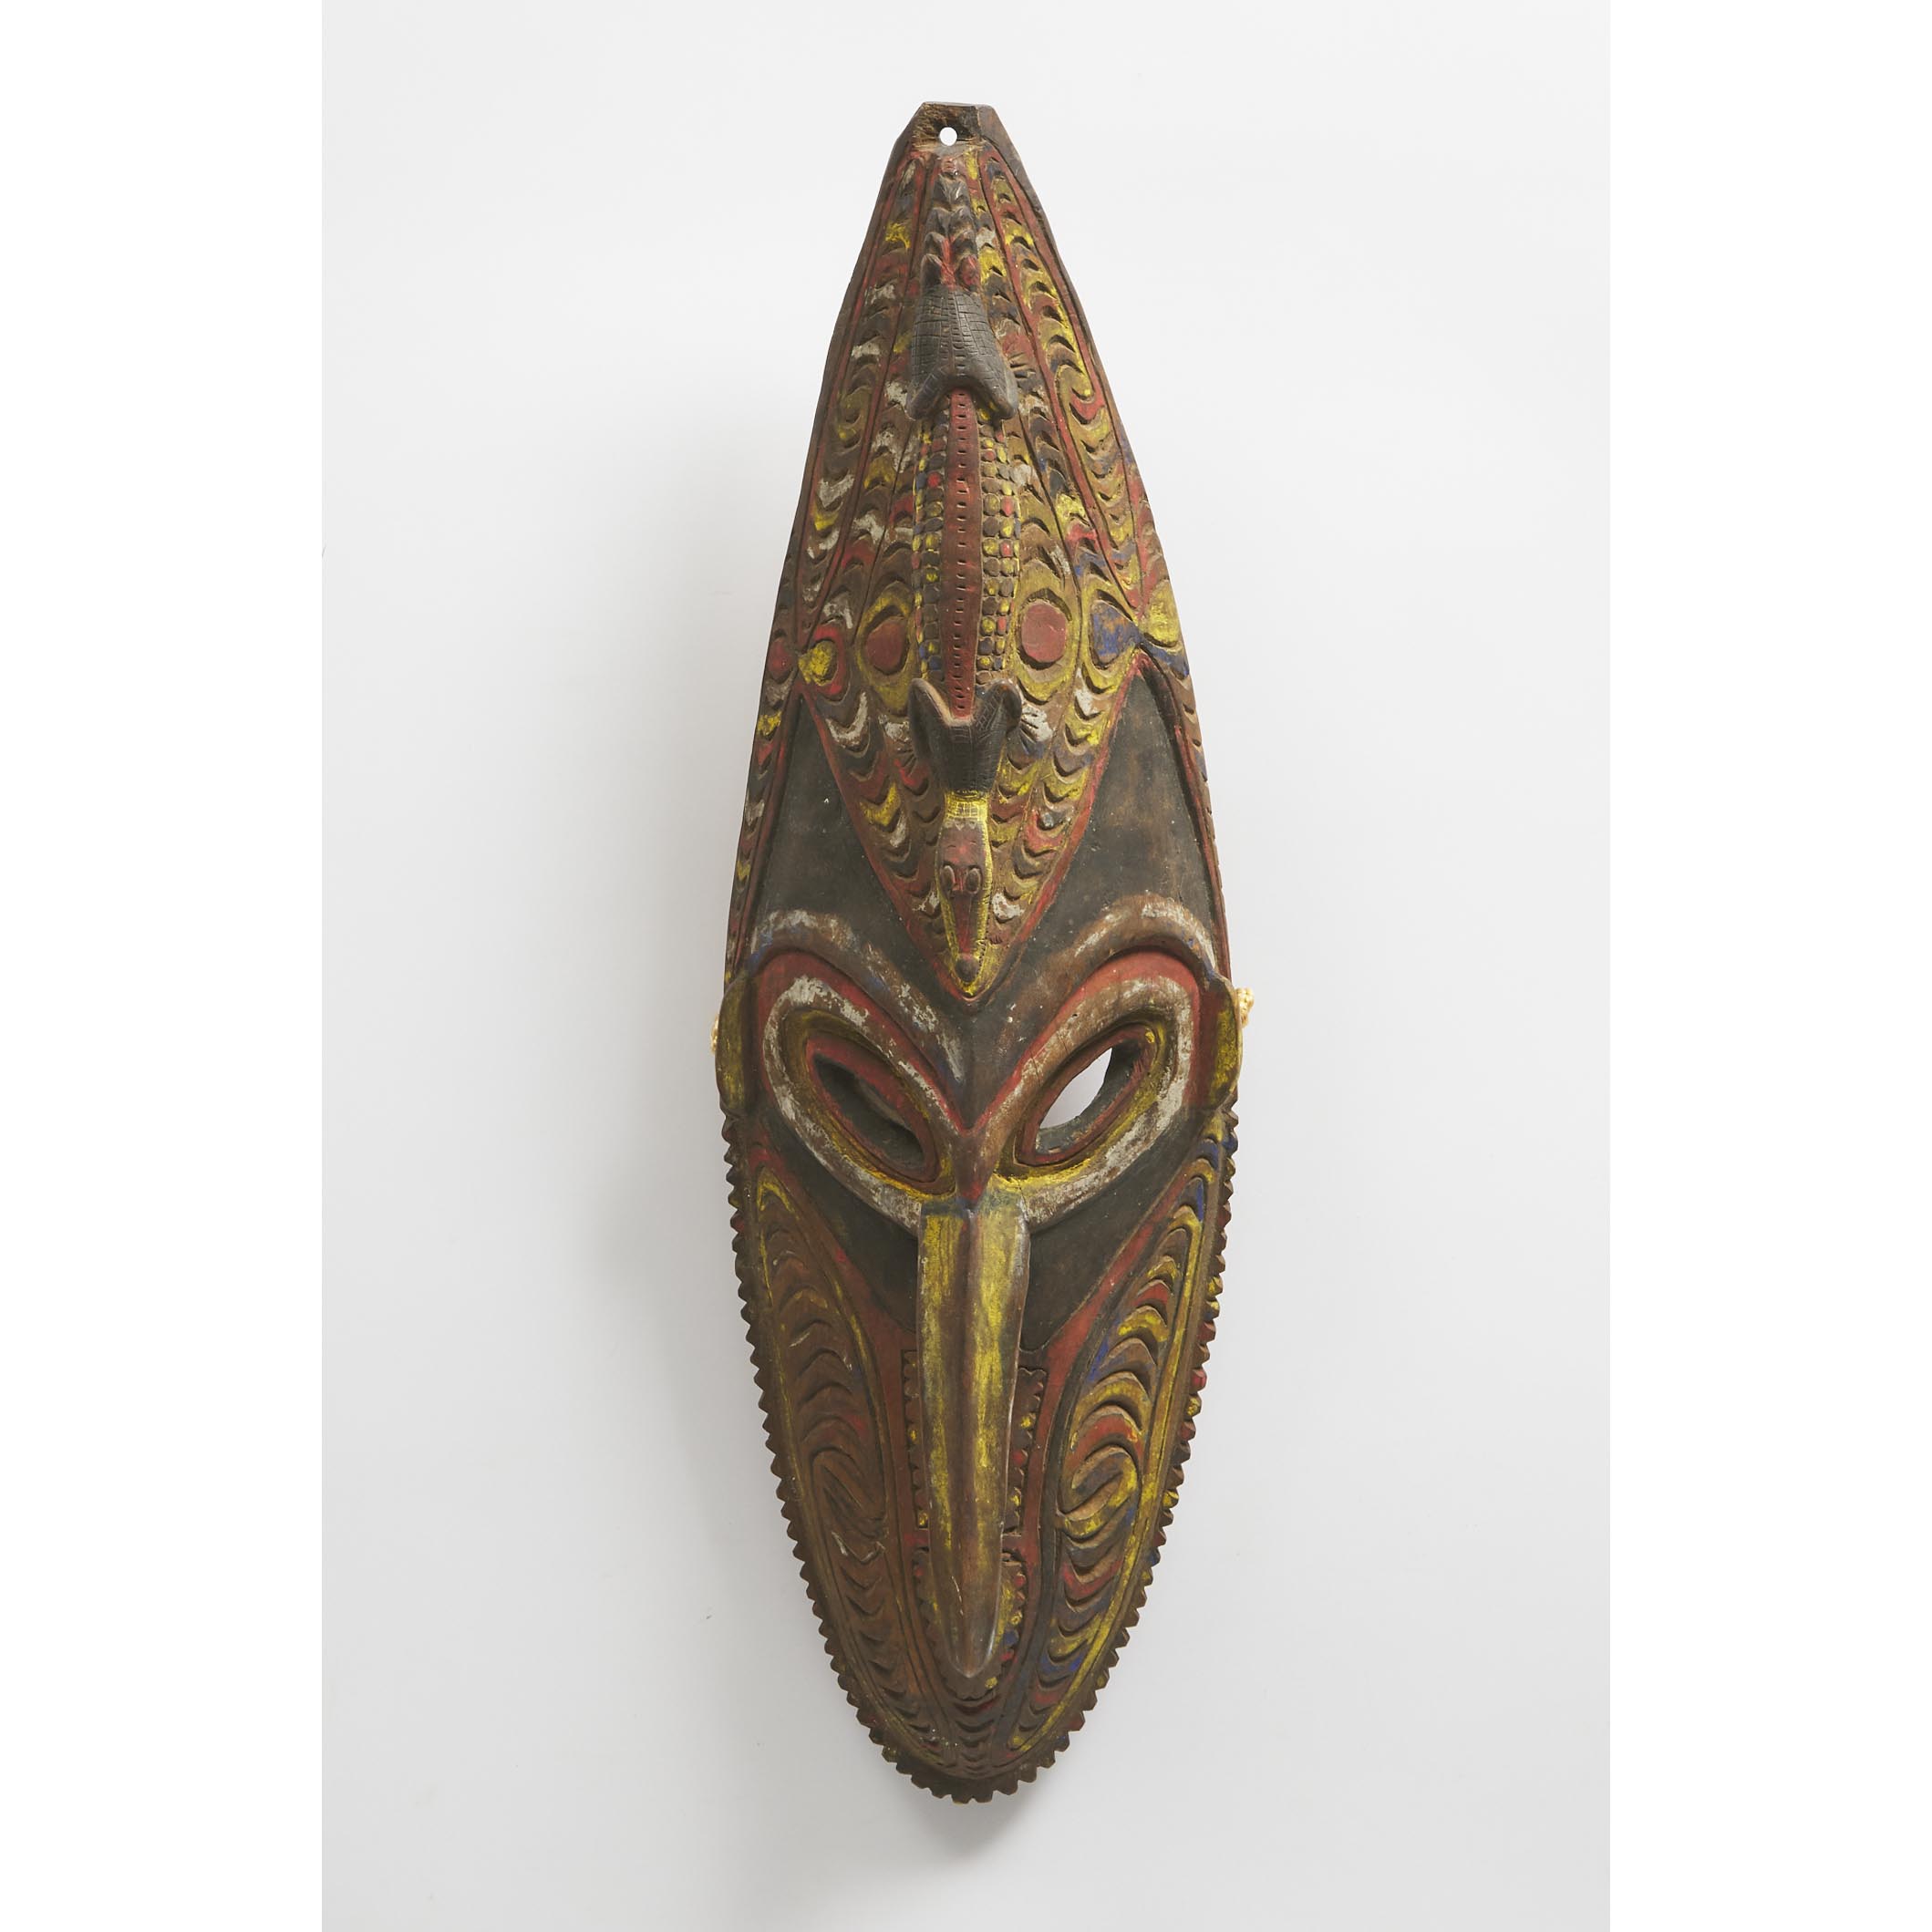 Mei Mask, Sepik River, Papua New Guinea, mid to late 20th century